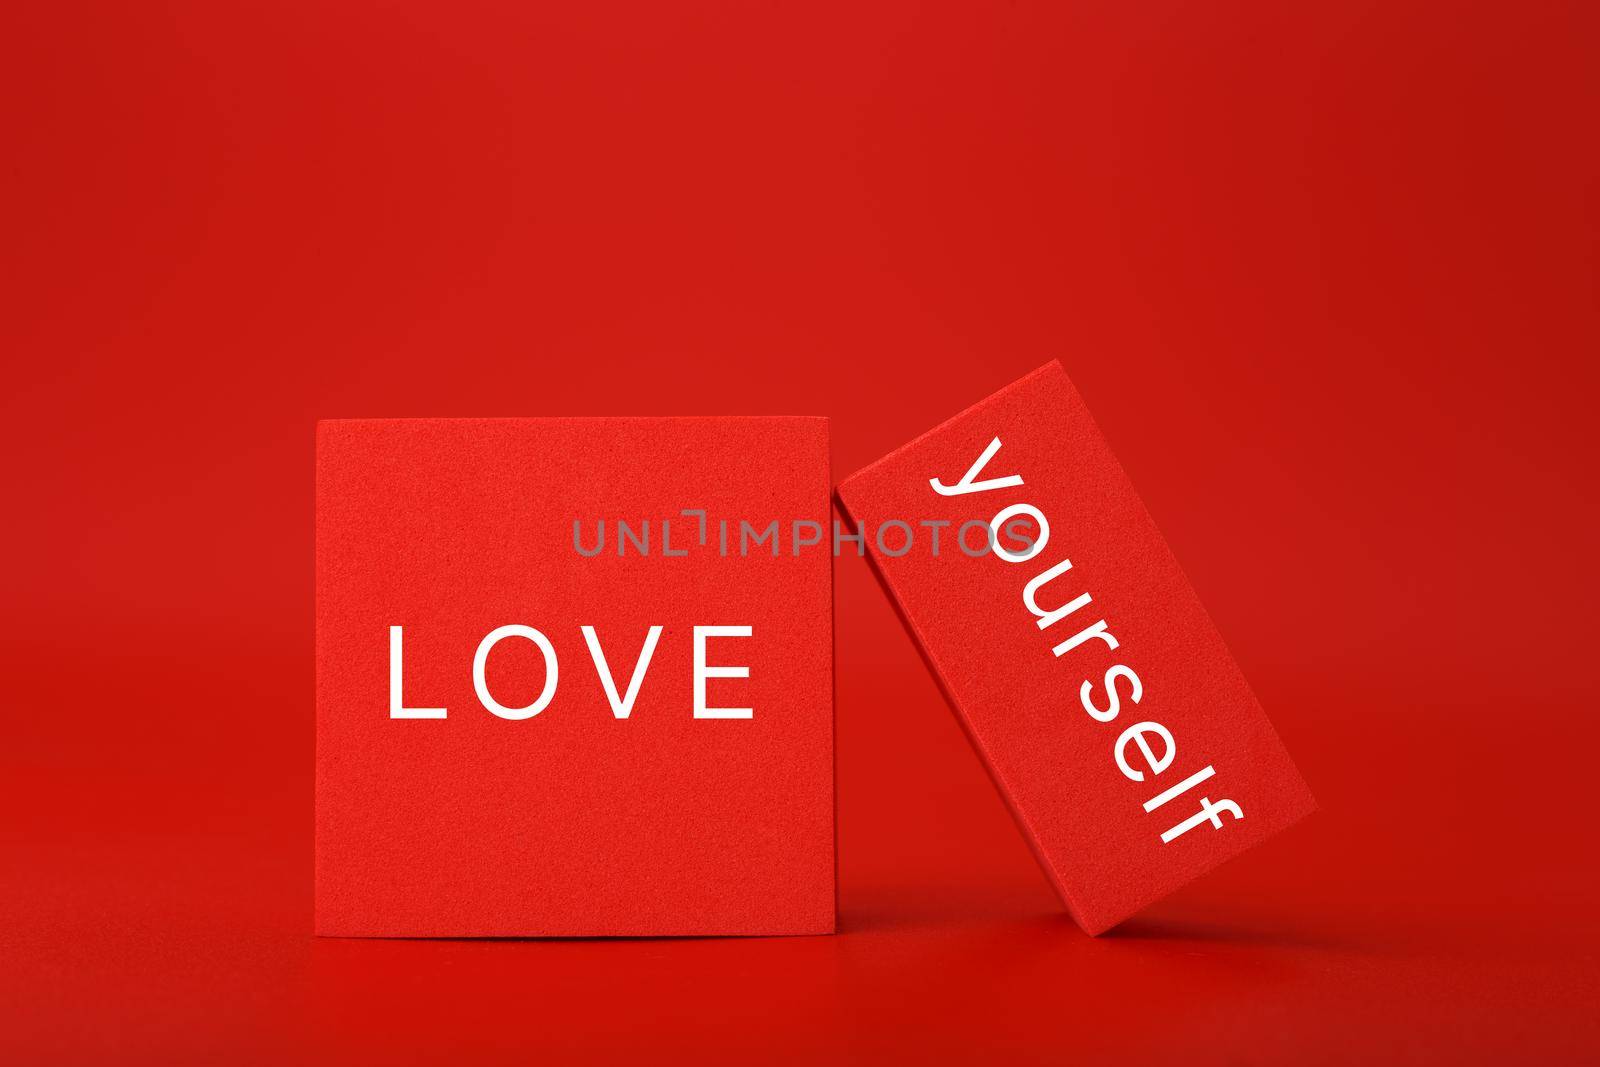 Trendy minimal self love creative concept in monochromatic red colors. Mental health, self acceptance, self care and respect or being single concept.